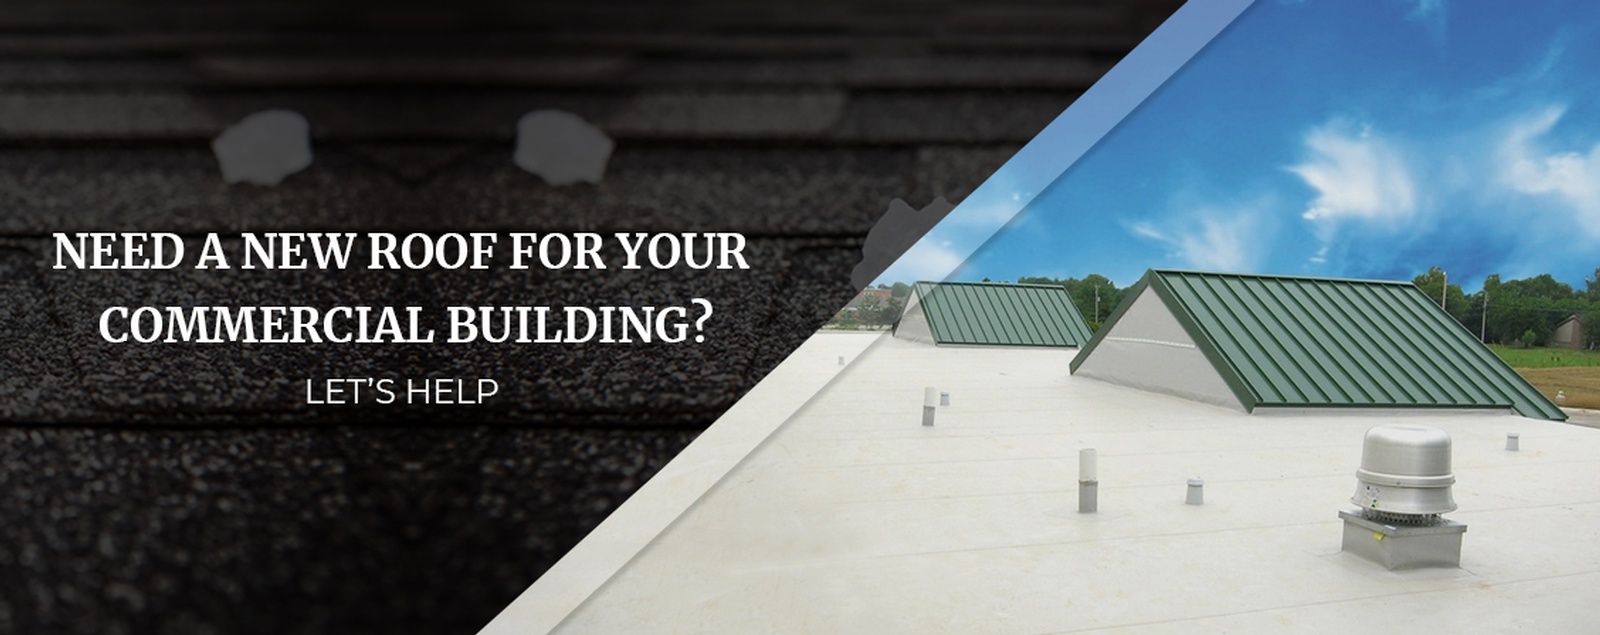 Need A New Roof For Your Commercial Building? Let’s Help